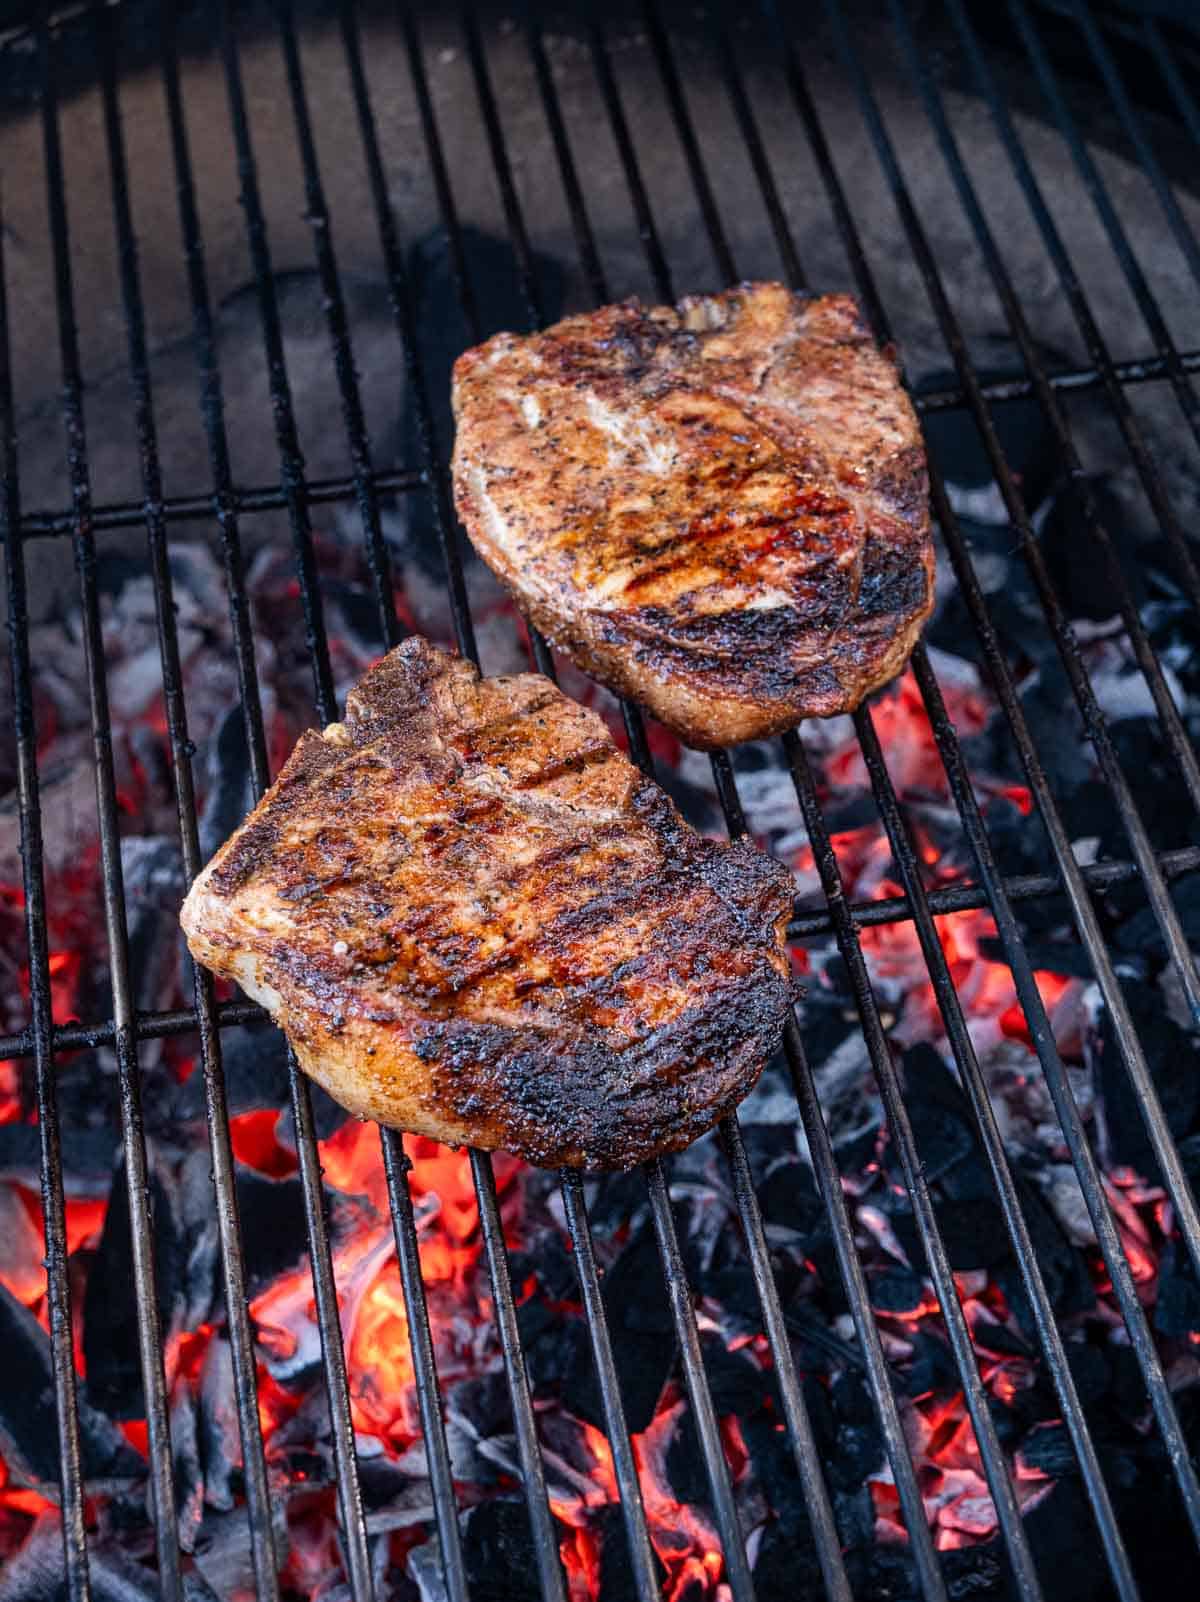 Two pork steaks cooking over a hot grill